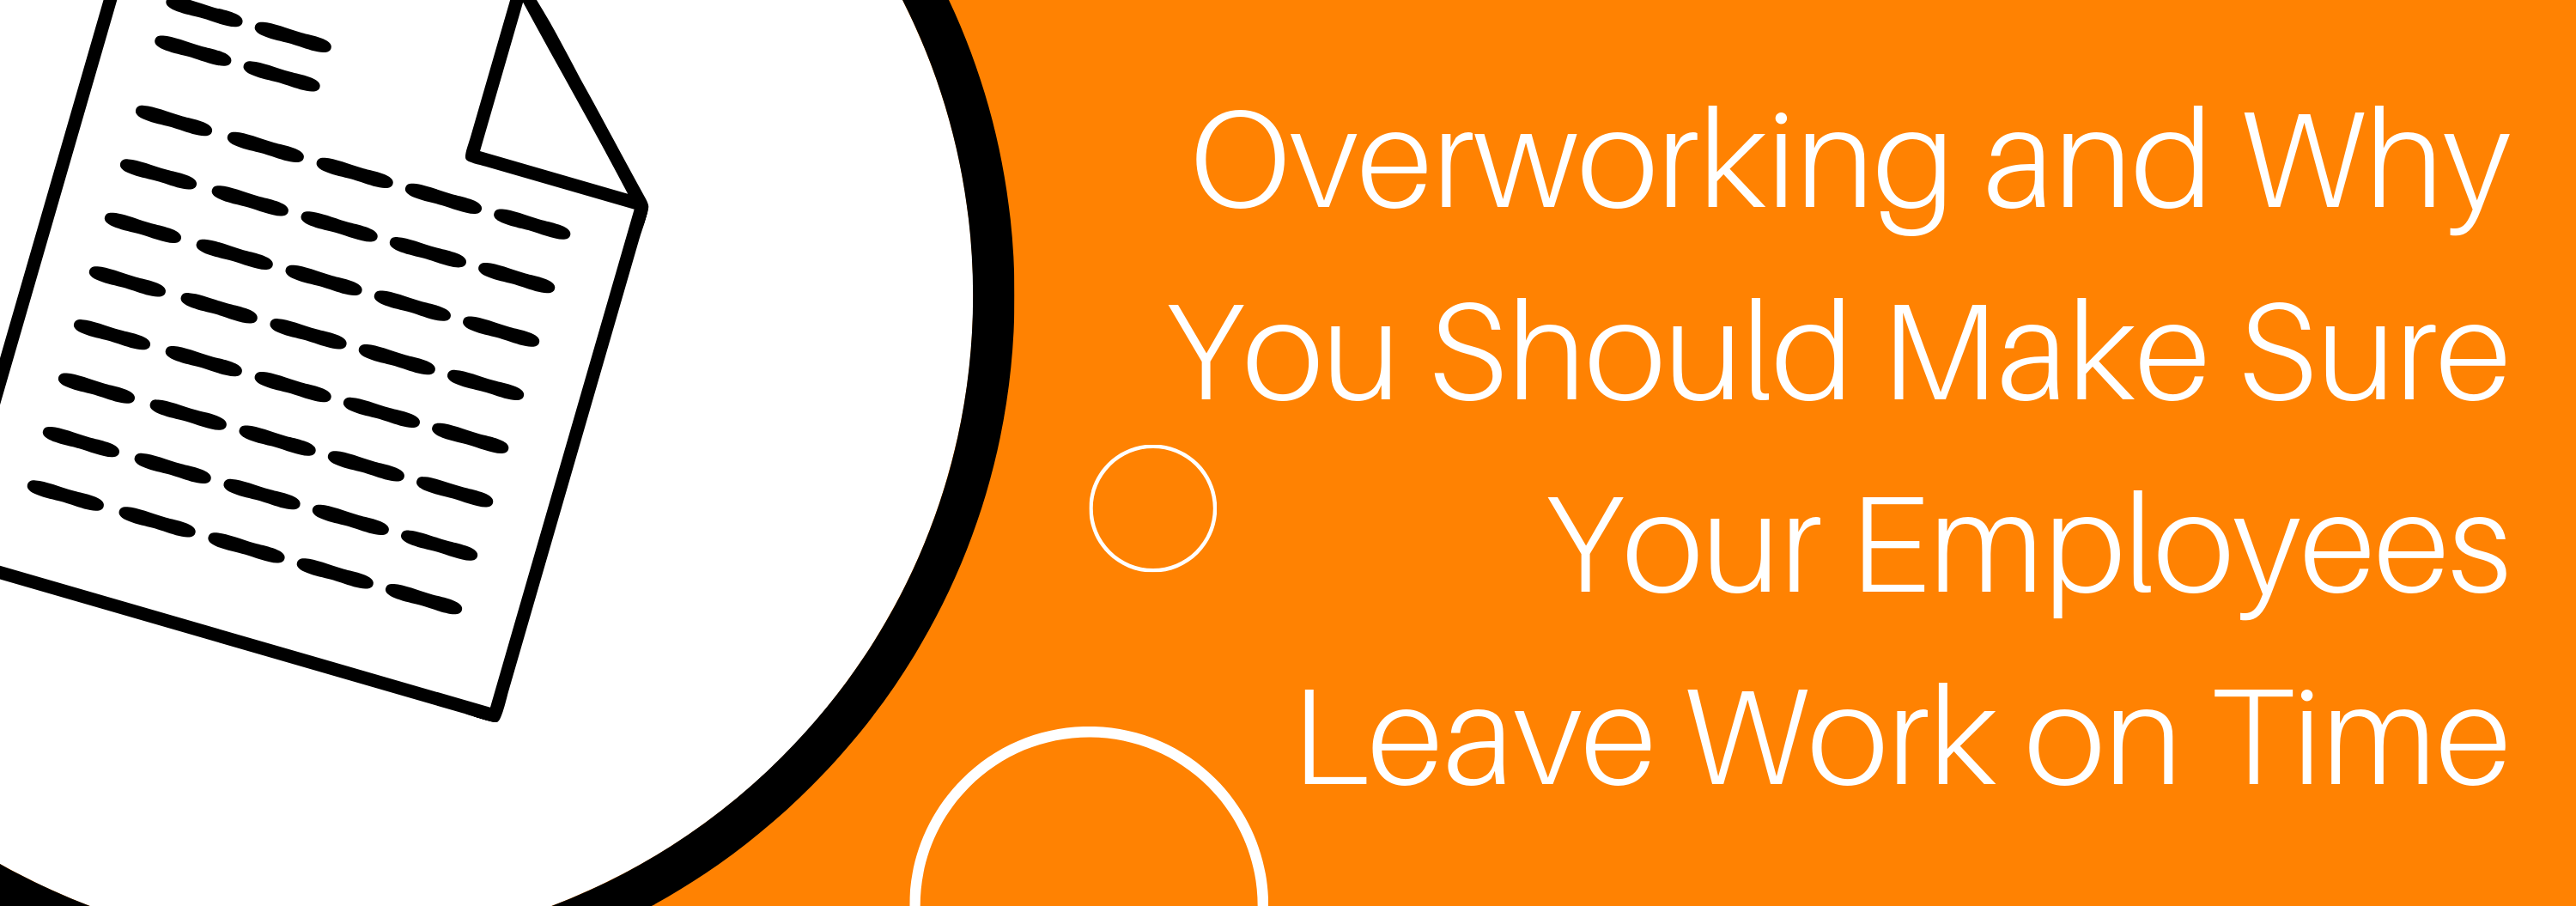 Why You Should Make Sure Your Employees Leave Work on Time